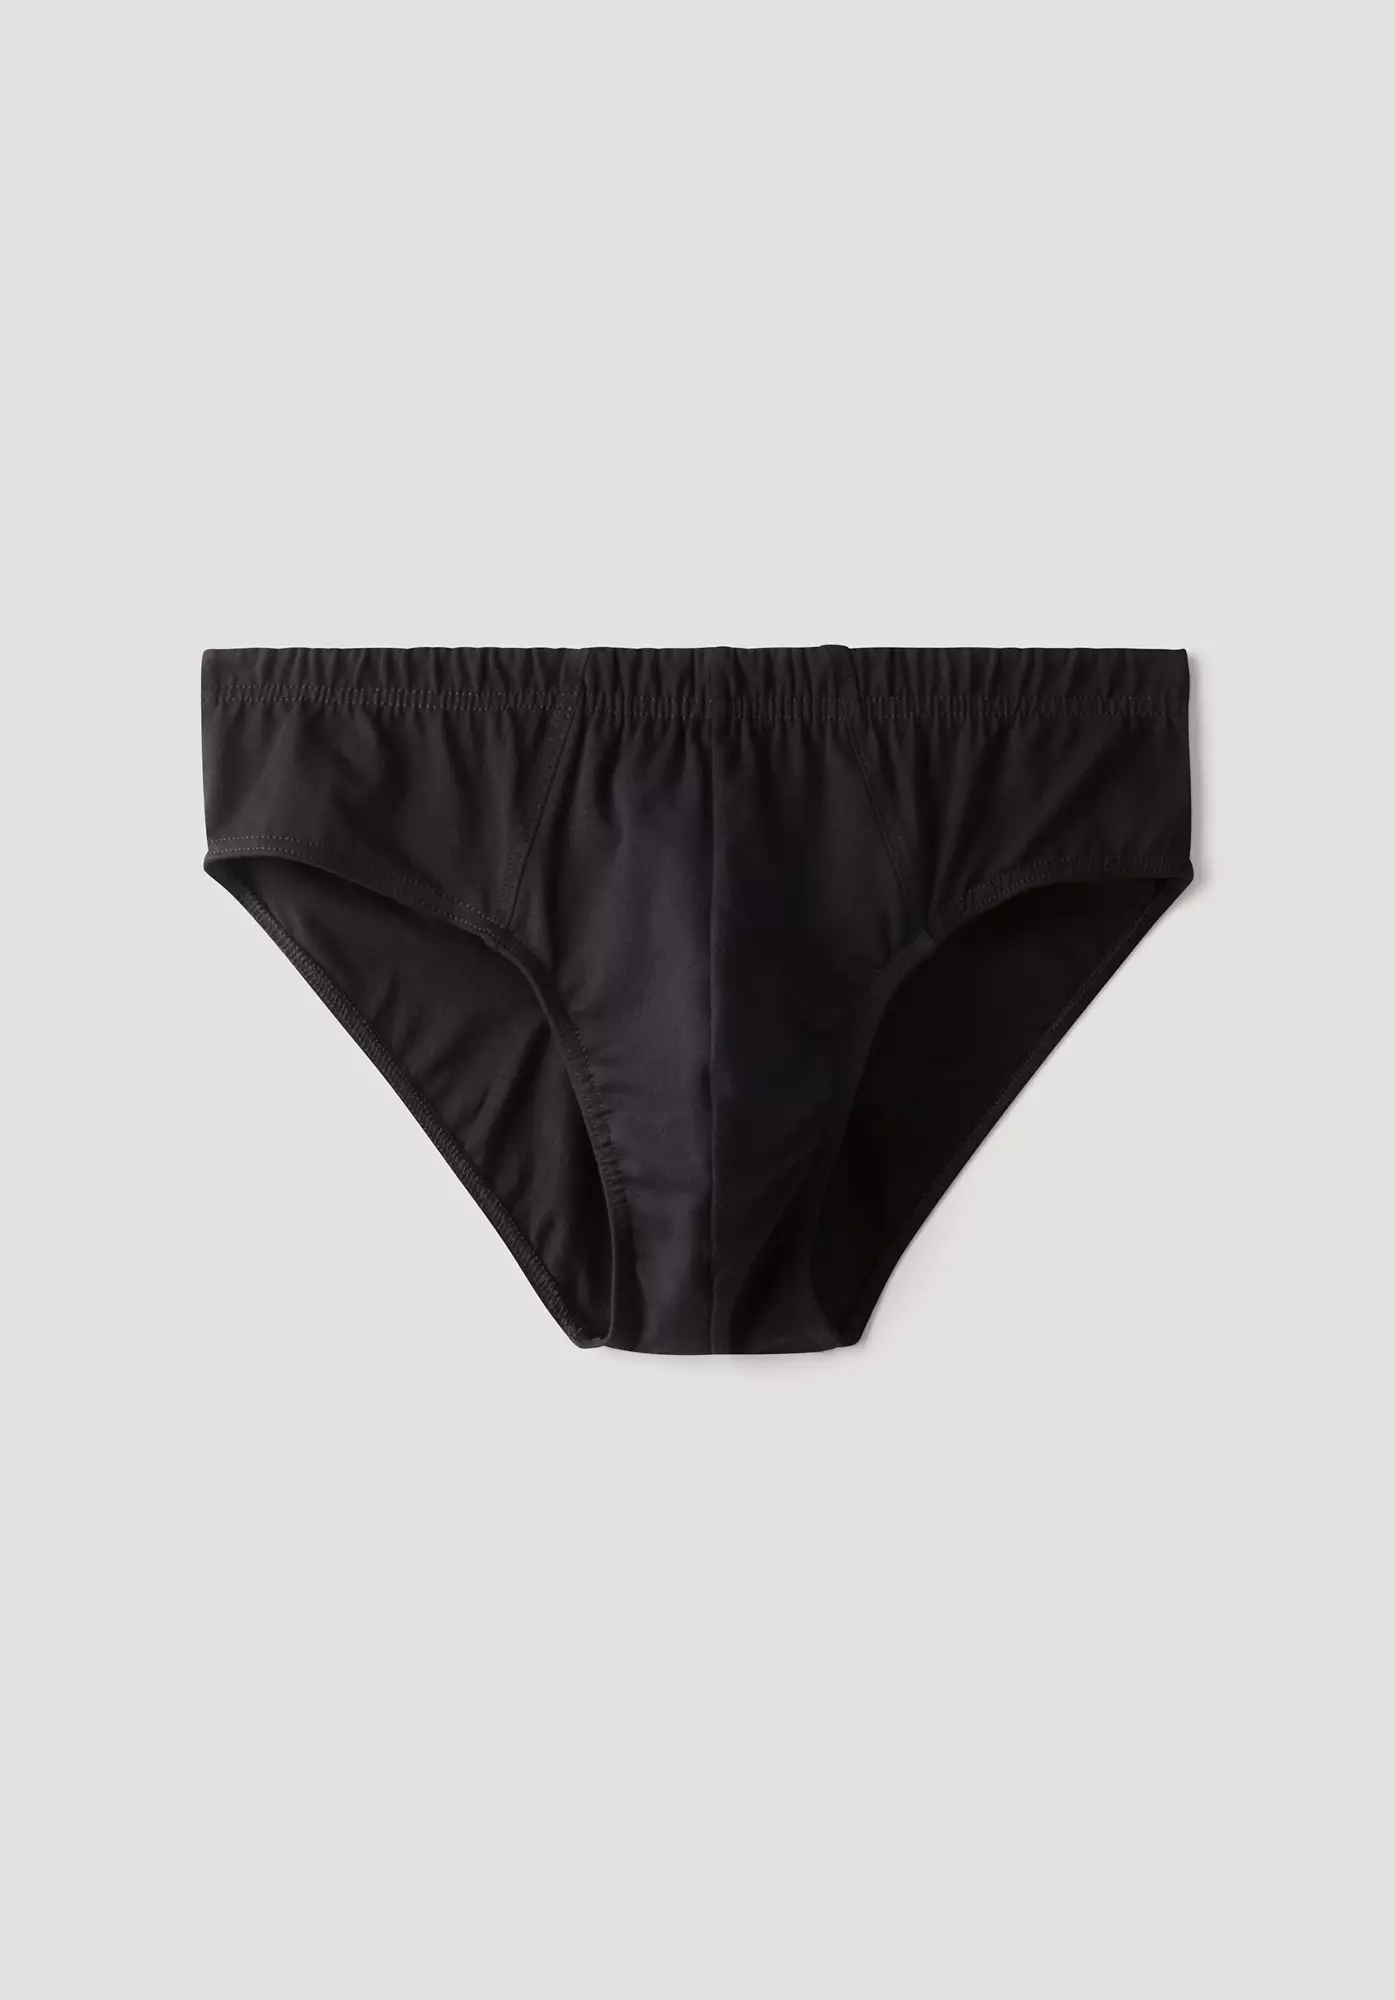 PureLUX briefs in a set of 2 made of organic cotton - 3